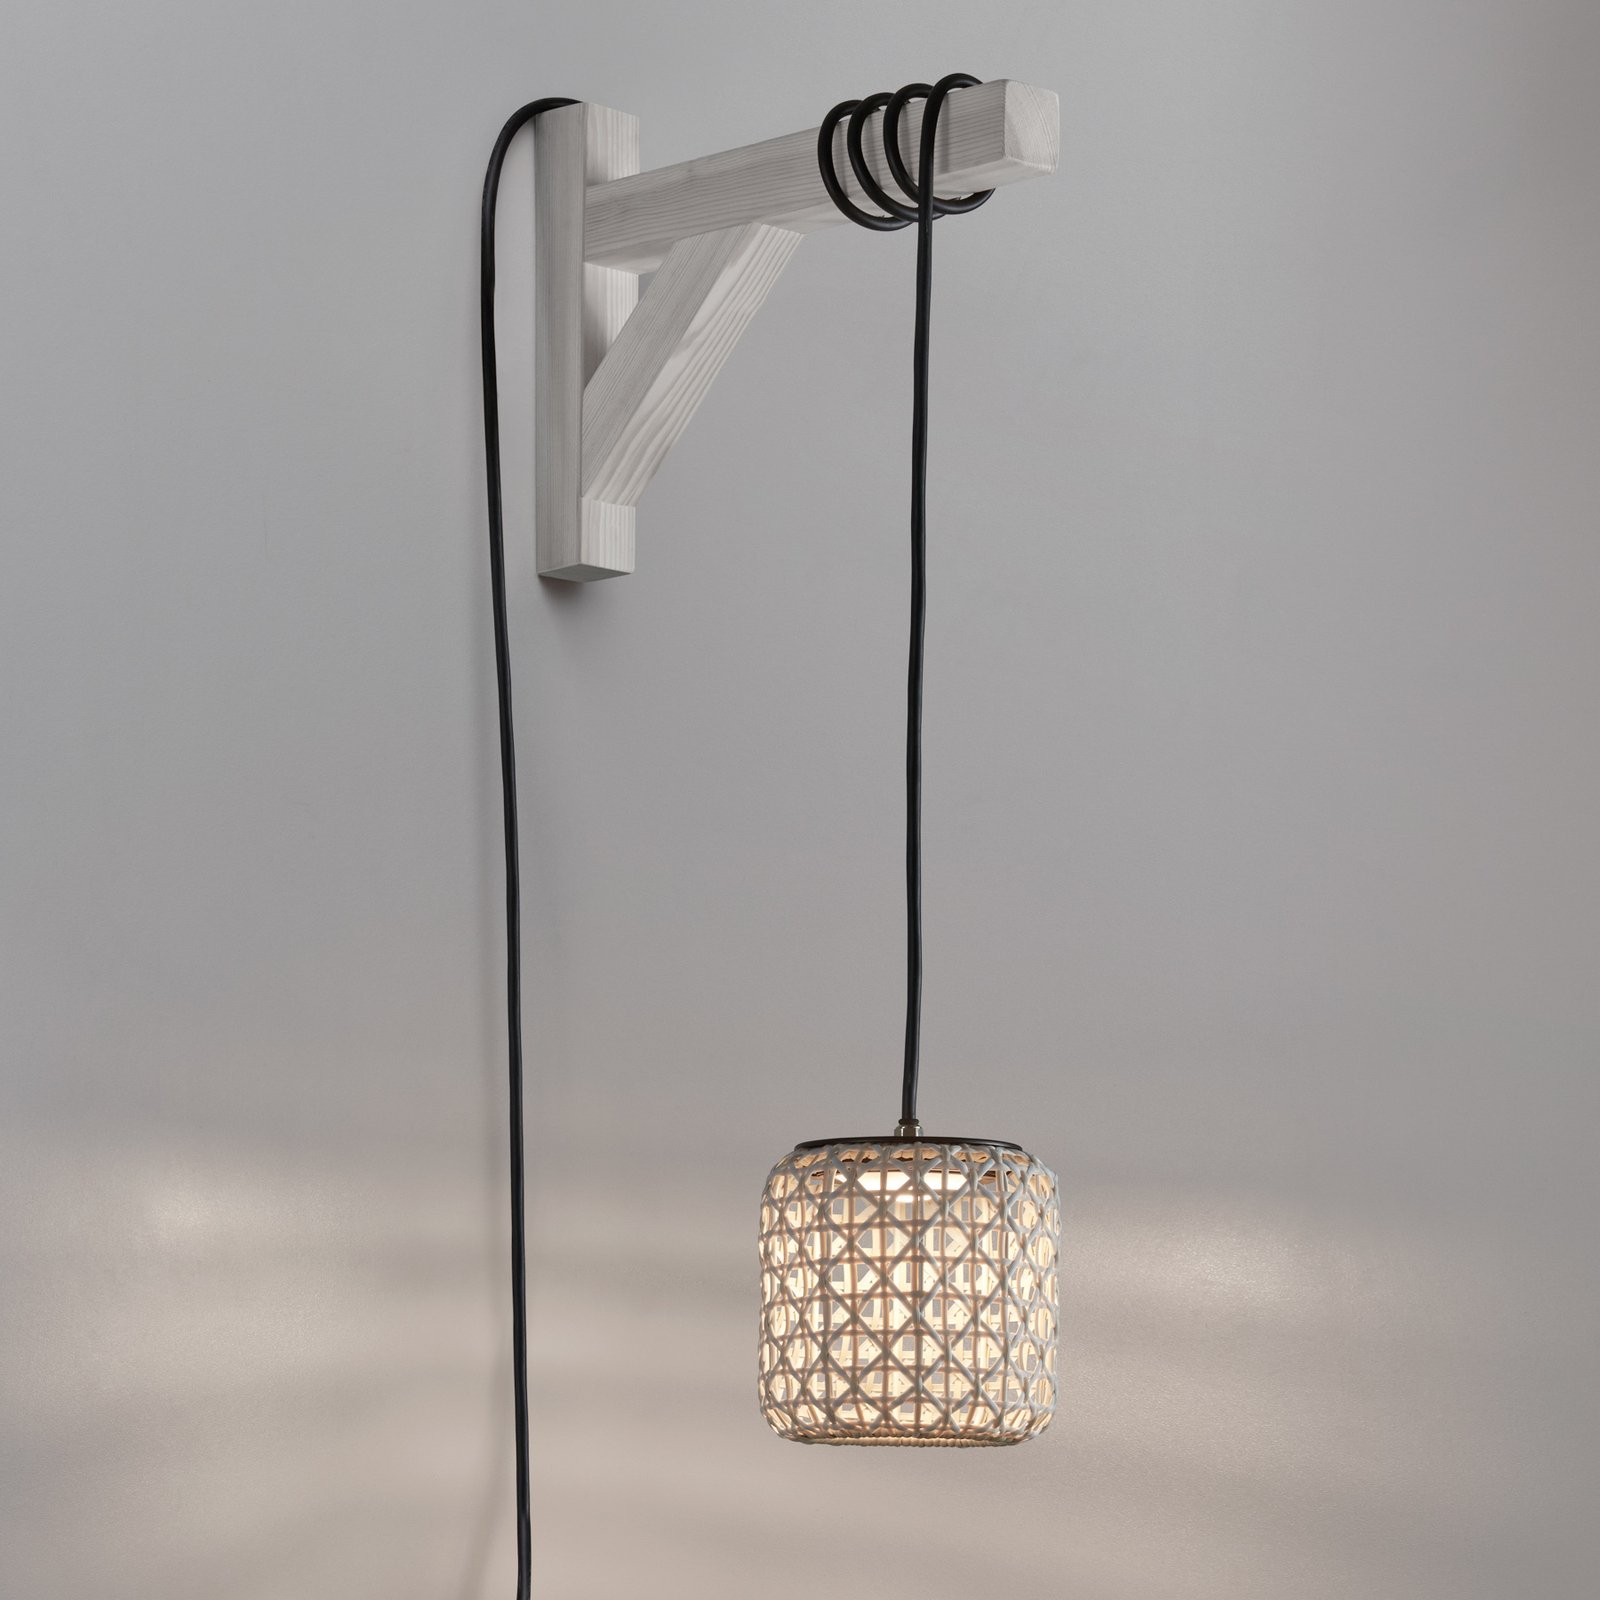 Bover Nans S/16/H Candeeiro suspenso LED, ficha, bege